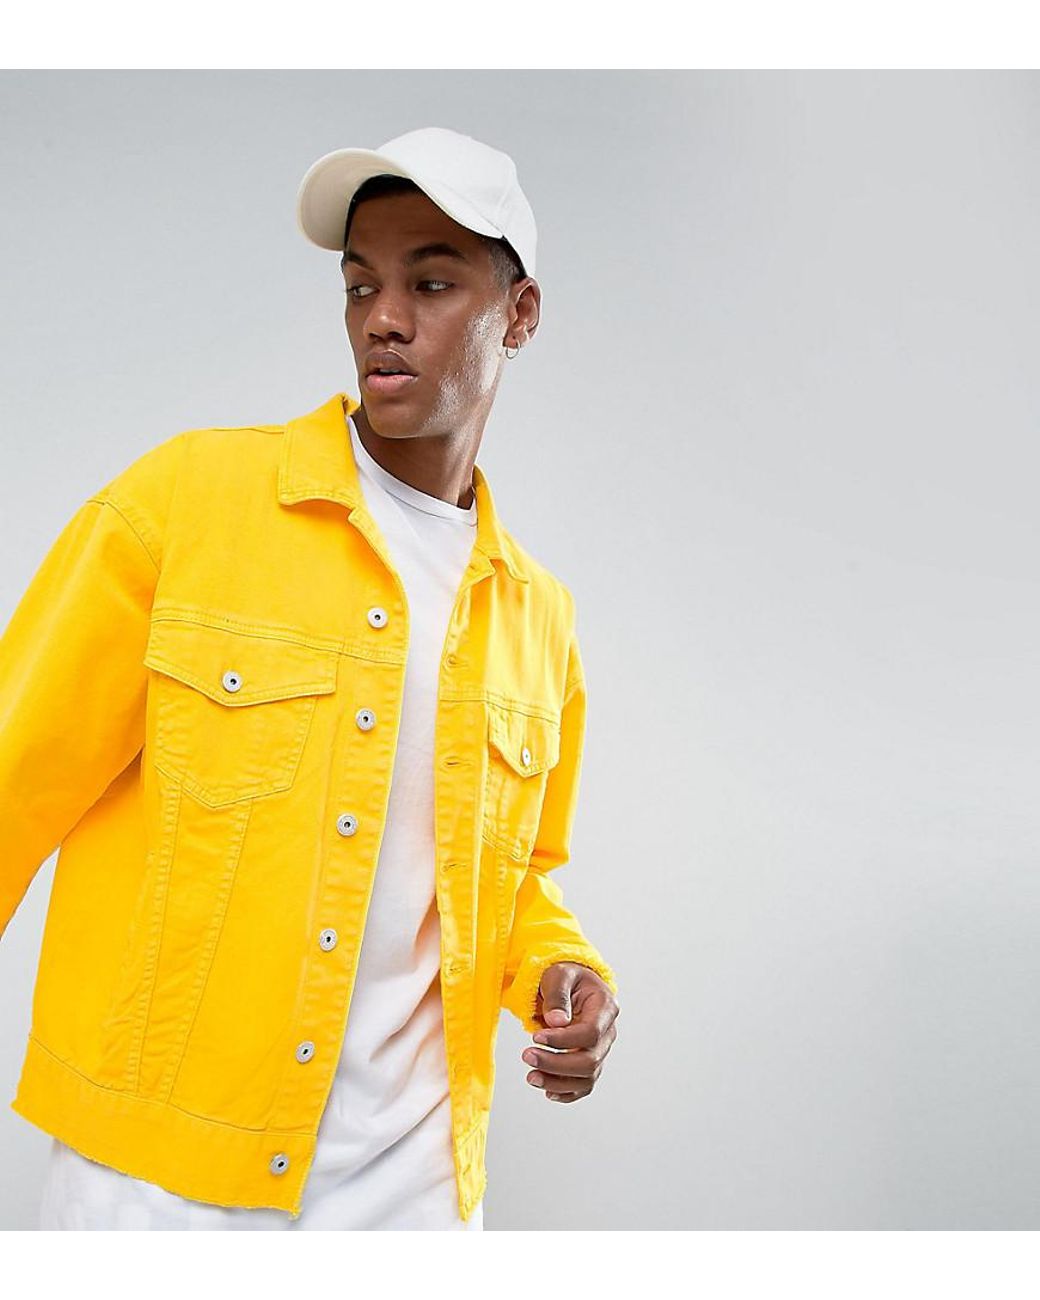 SSENSE Exclusive Yellow & Black Denim Jacket by Ottolinger on Sale-totobed.com.vn